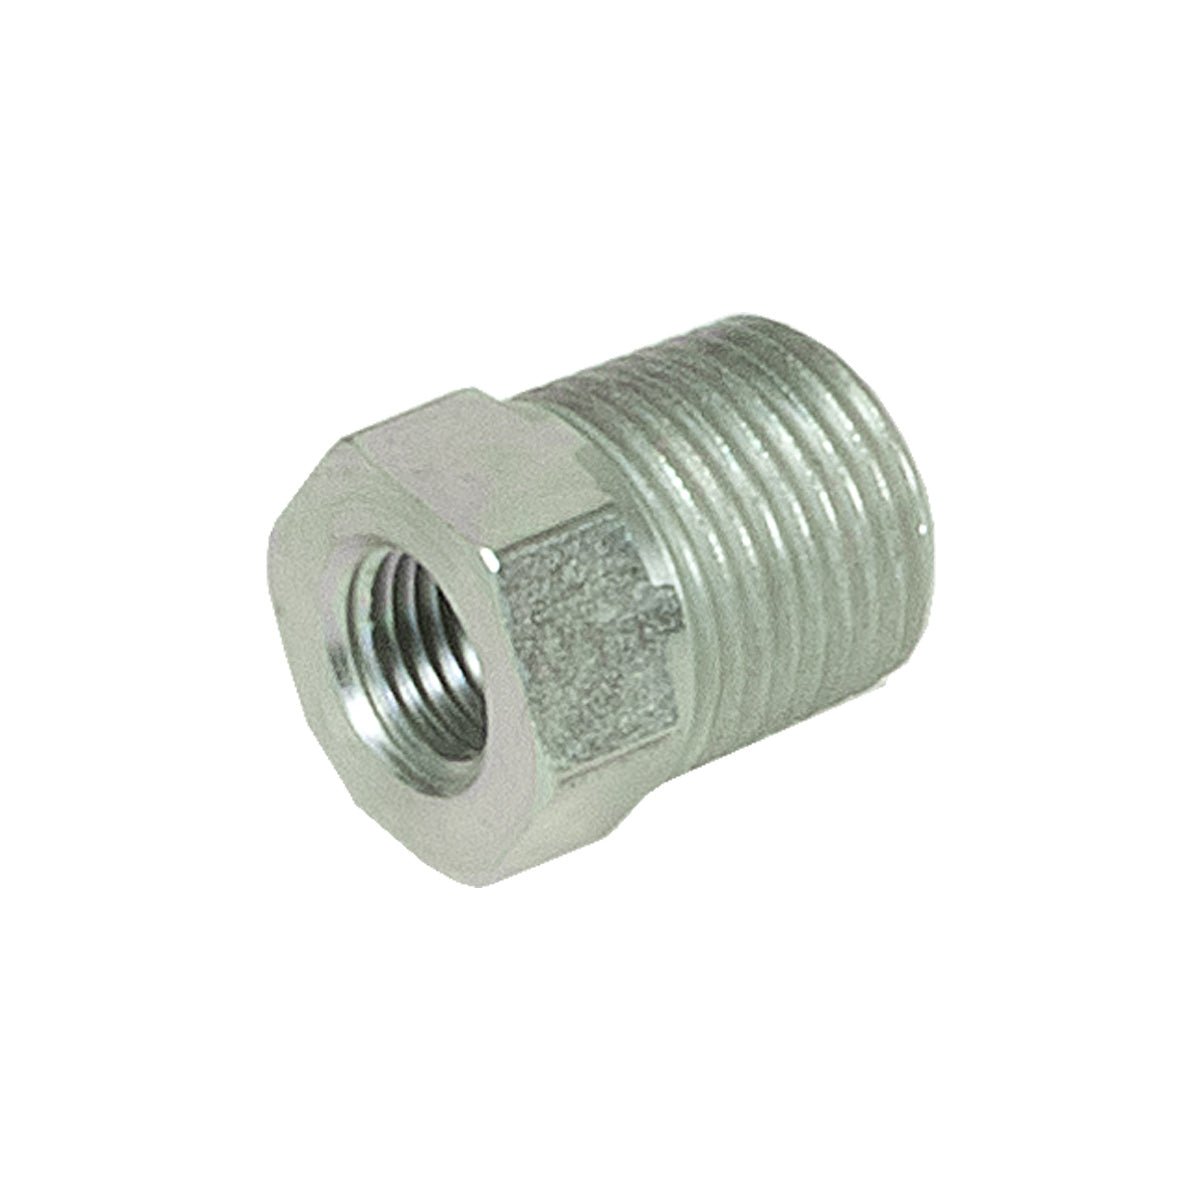 Hex Bushing 1/2" x 1/4" | Air Filter Cleaner